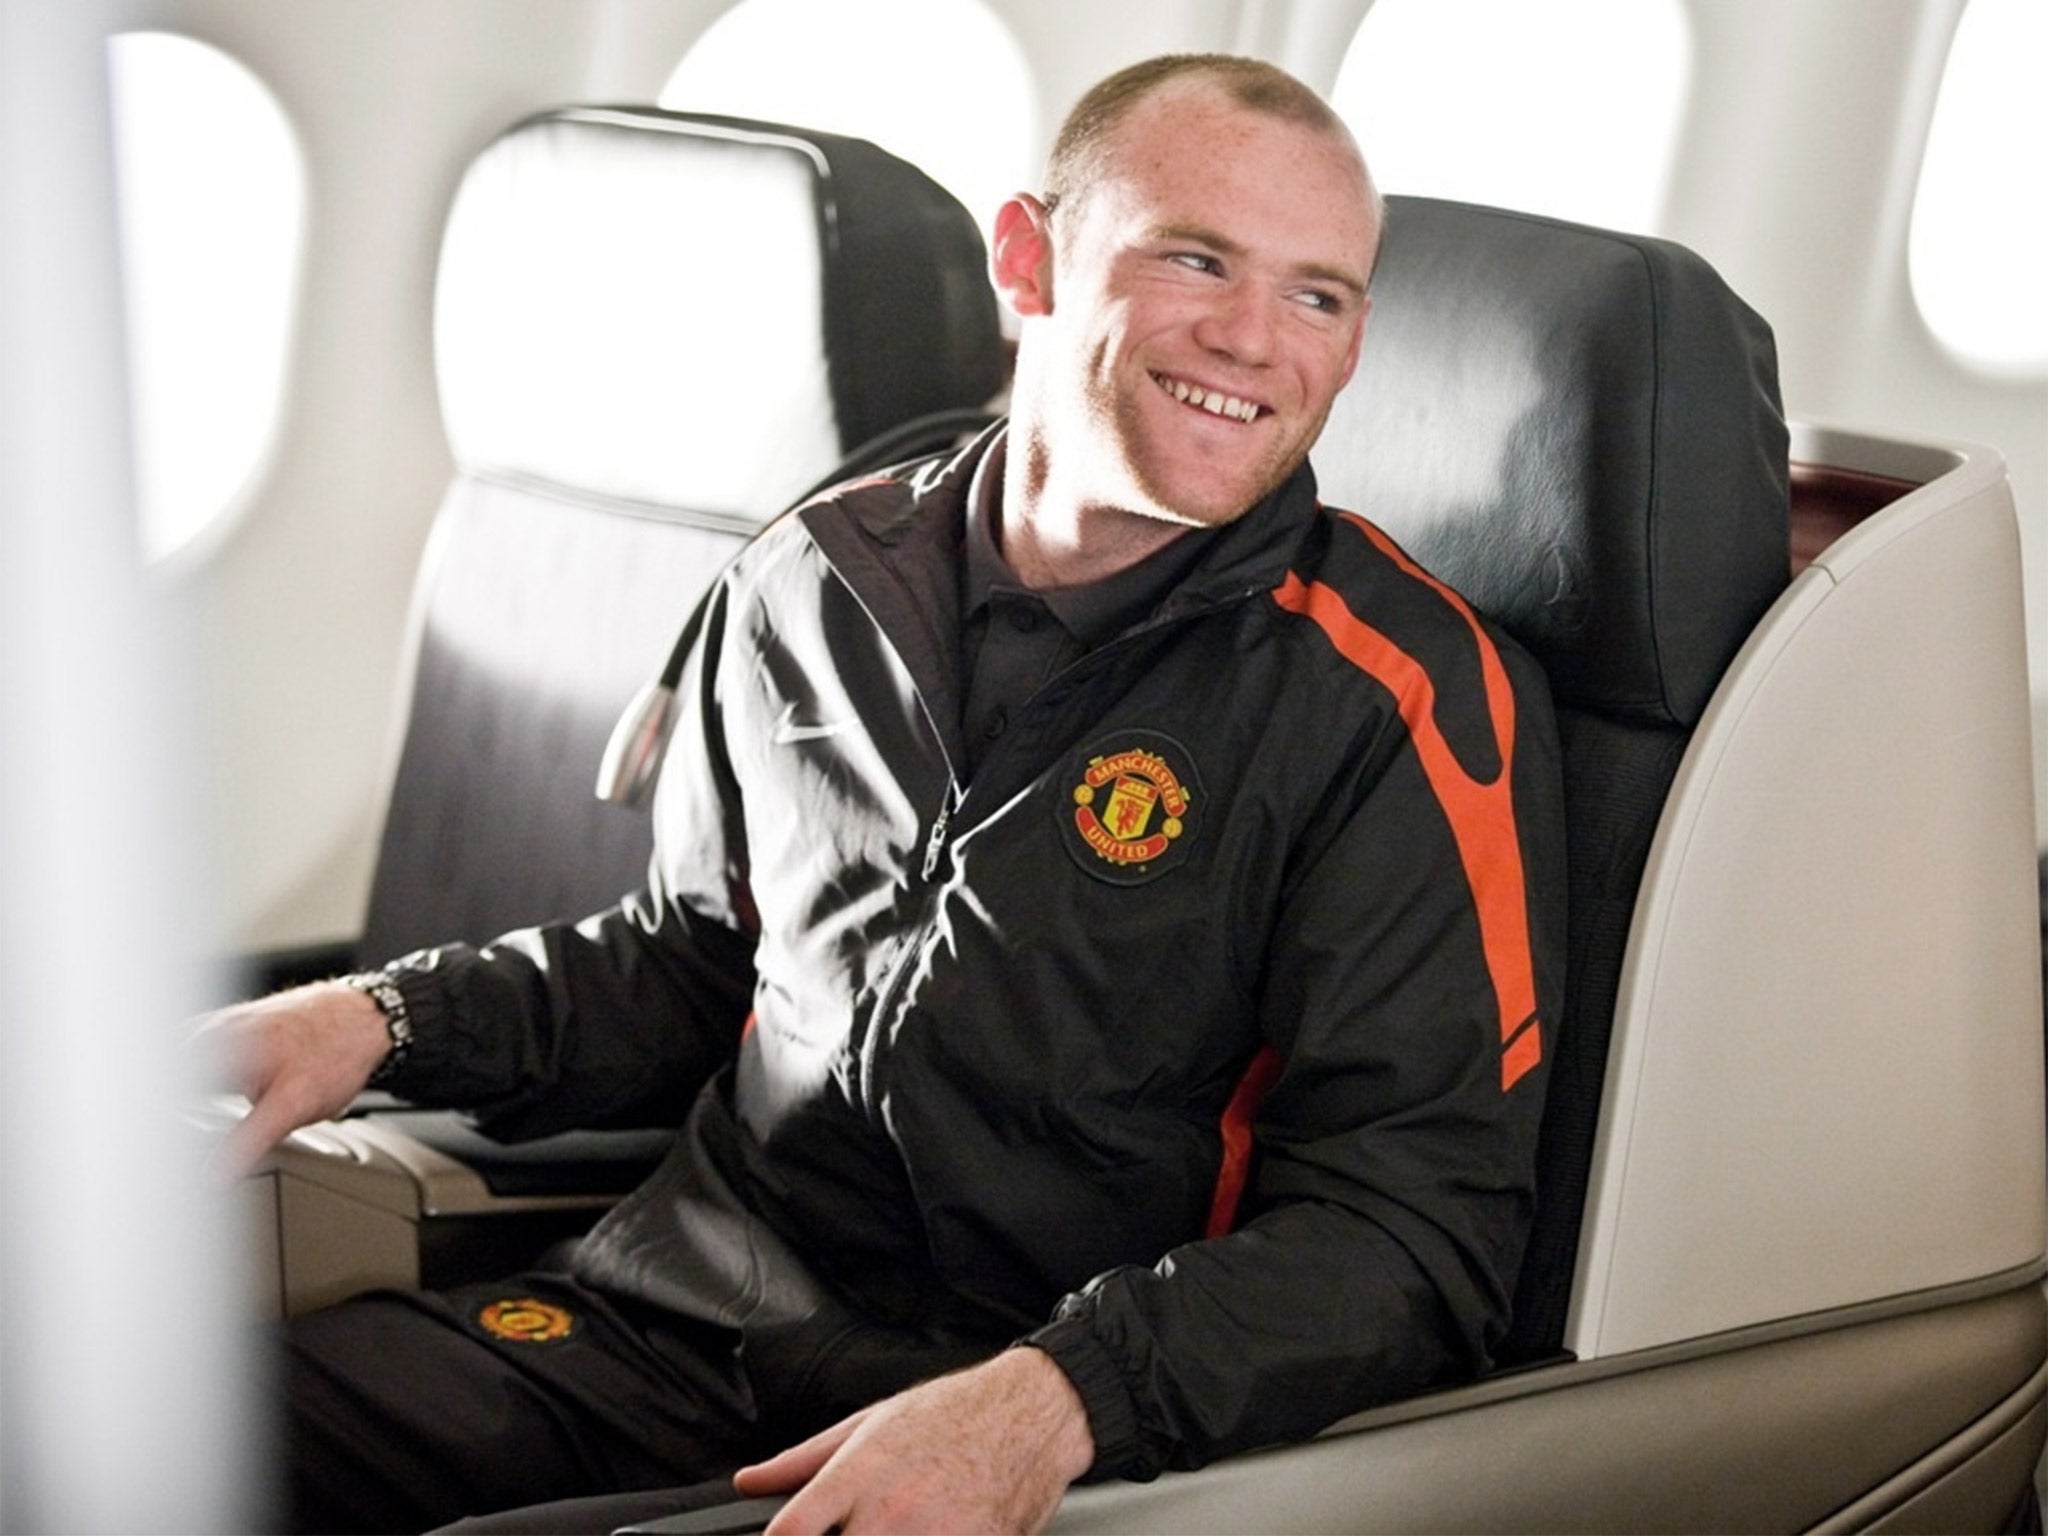 Wayne Rooney apparently has Turkey’s seal of acting approval after appearing in adverts for the country’s national airline